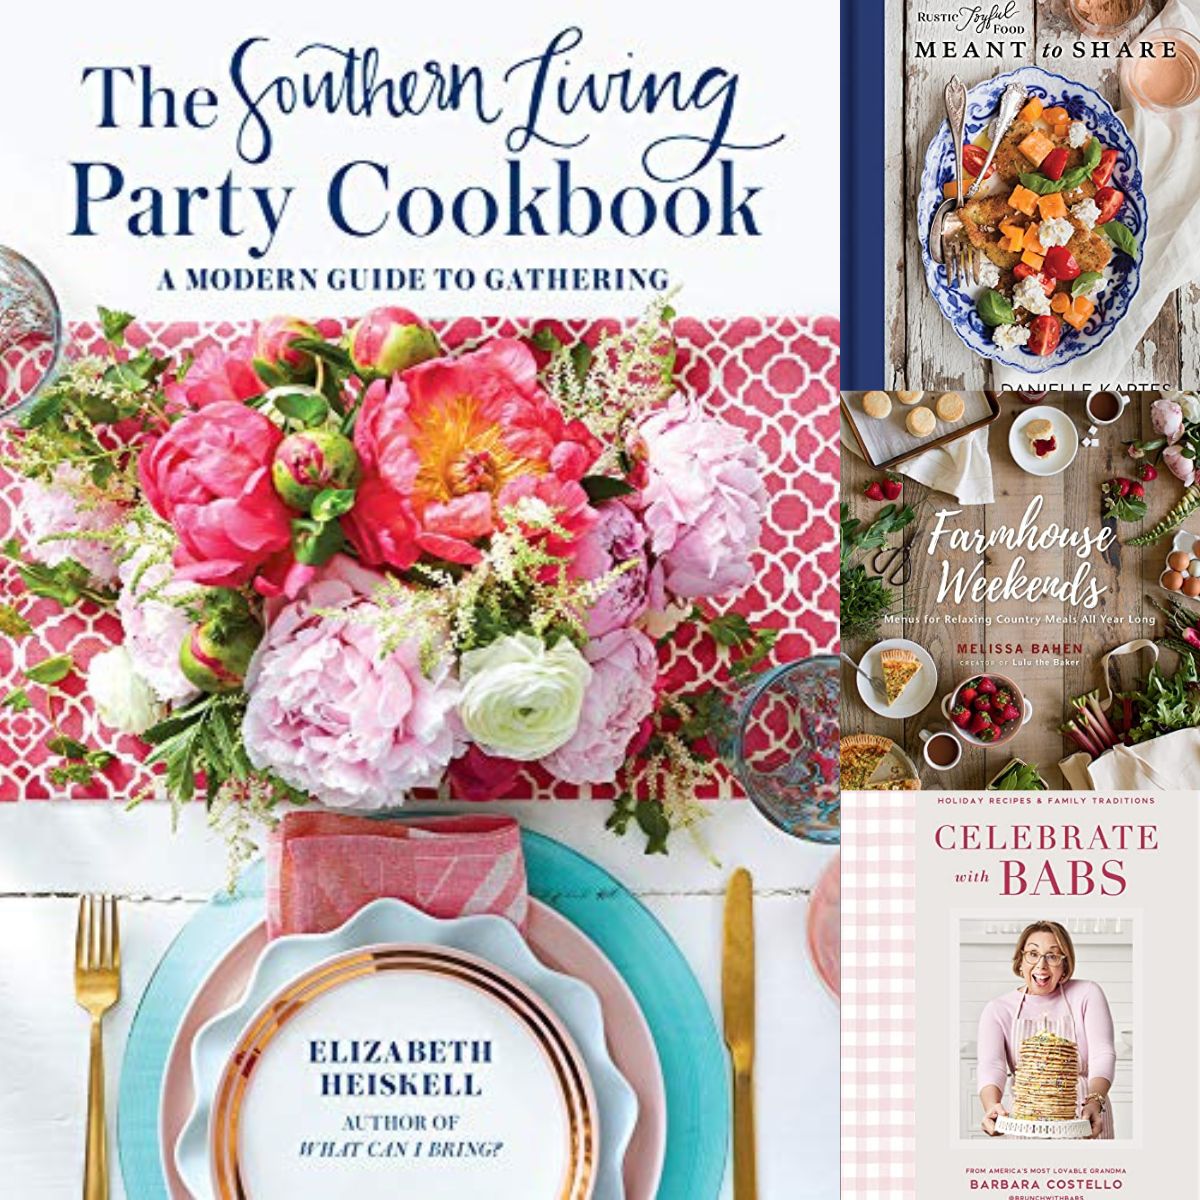 A photo collage shows some of the best cookbooks for parties.